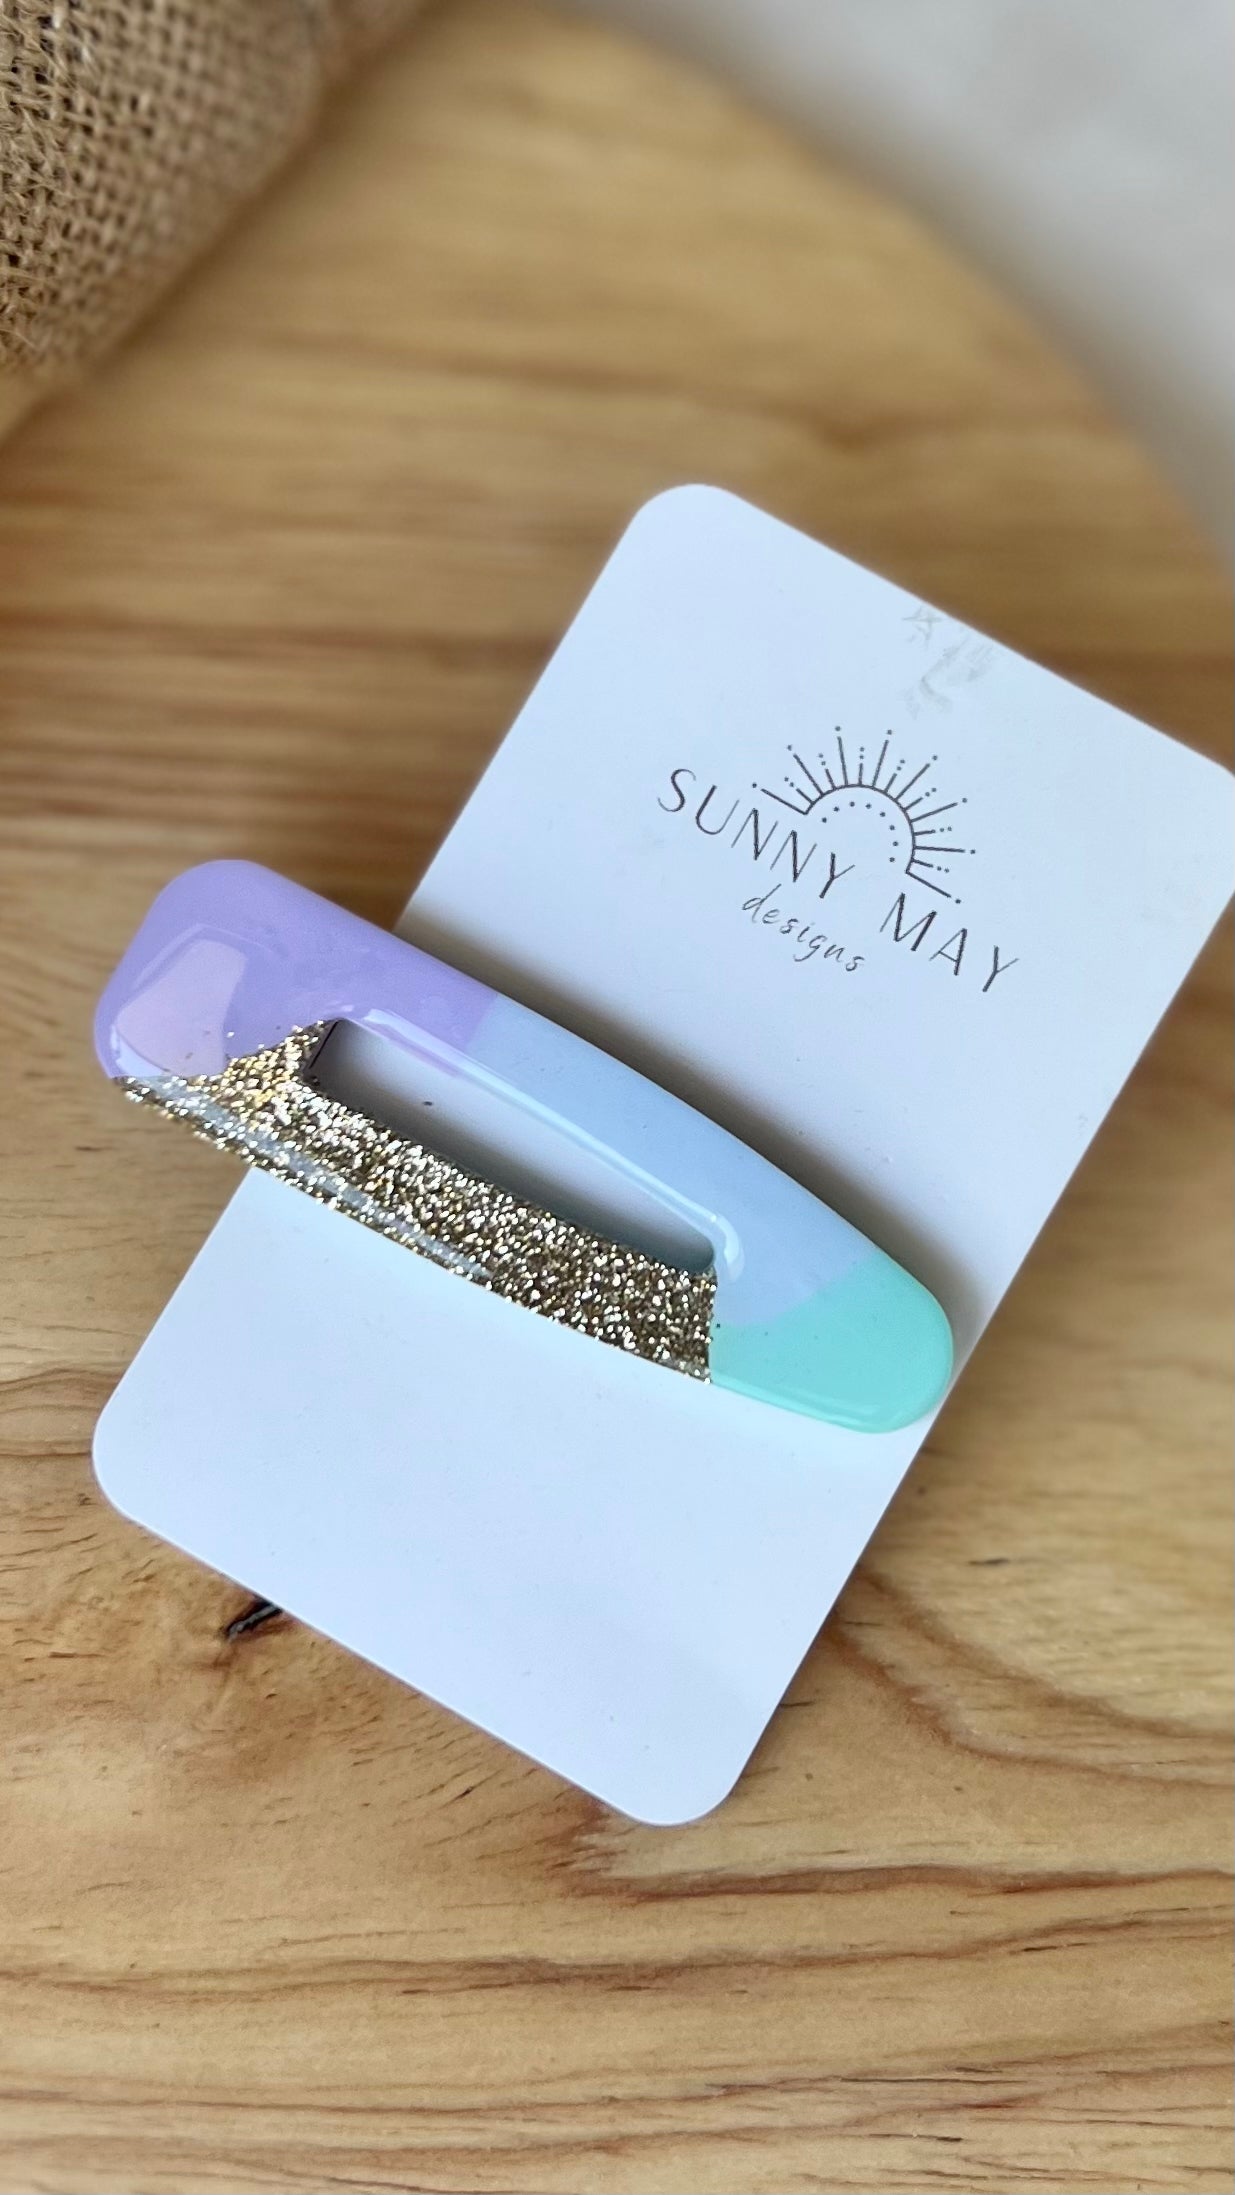 Sunny May Hair Clips: These hair slides are handmade from a delightful mix of colours and glitter, creating the perfect mix of vibrant colour and shine to brighten up your outfit
These go - Ciao Bella Dresses 